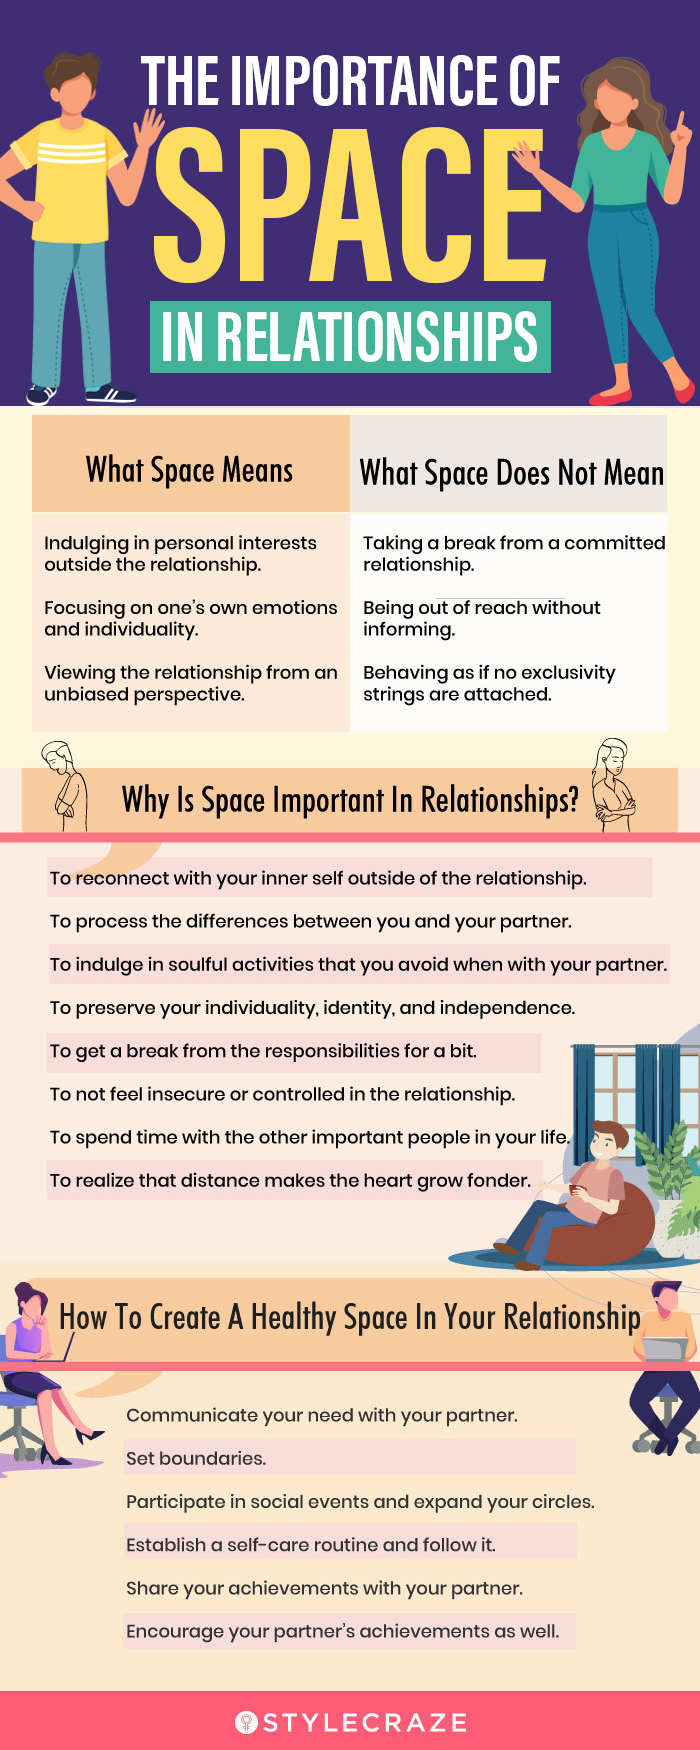 The importance of space in relationships (infographic)